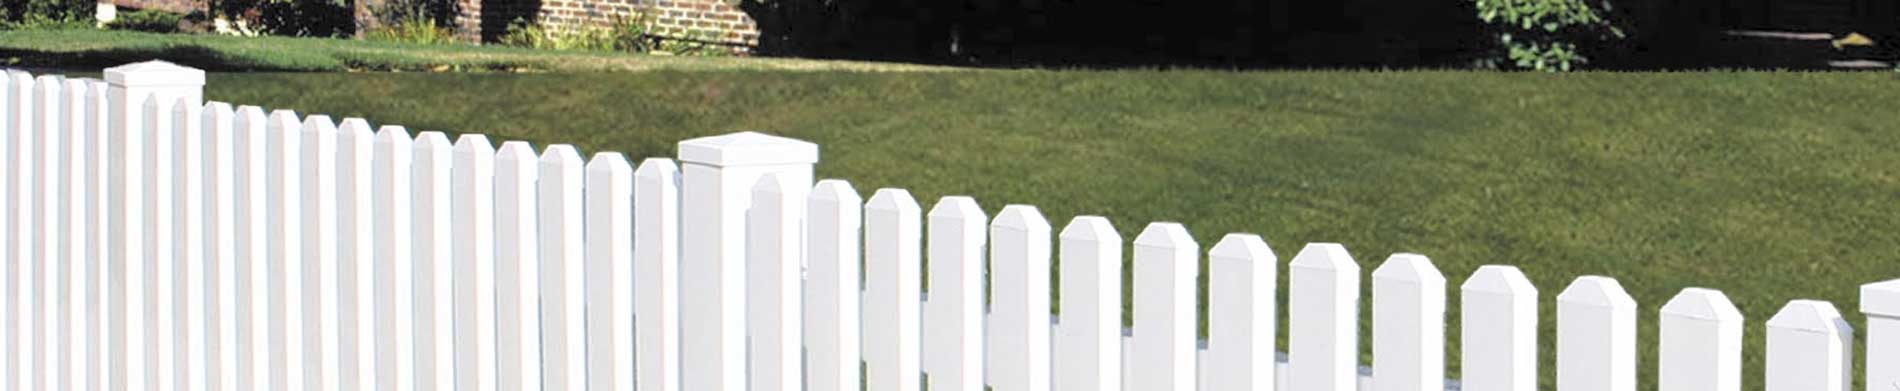 Introducing Vinyl Fencing: The Basics You Need to Know